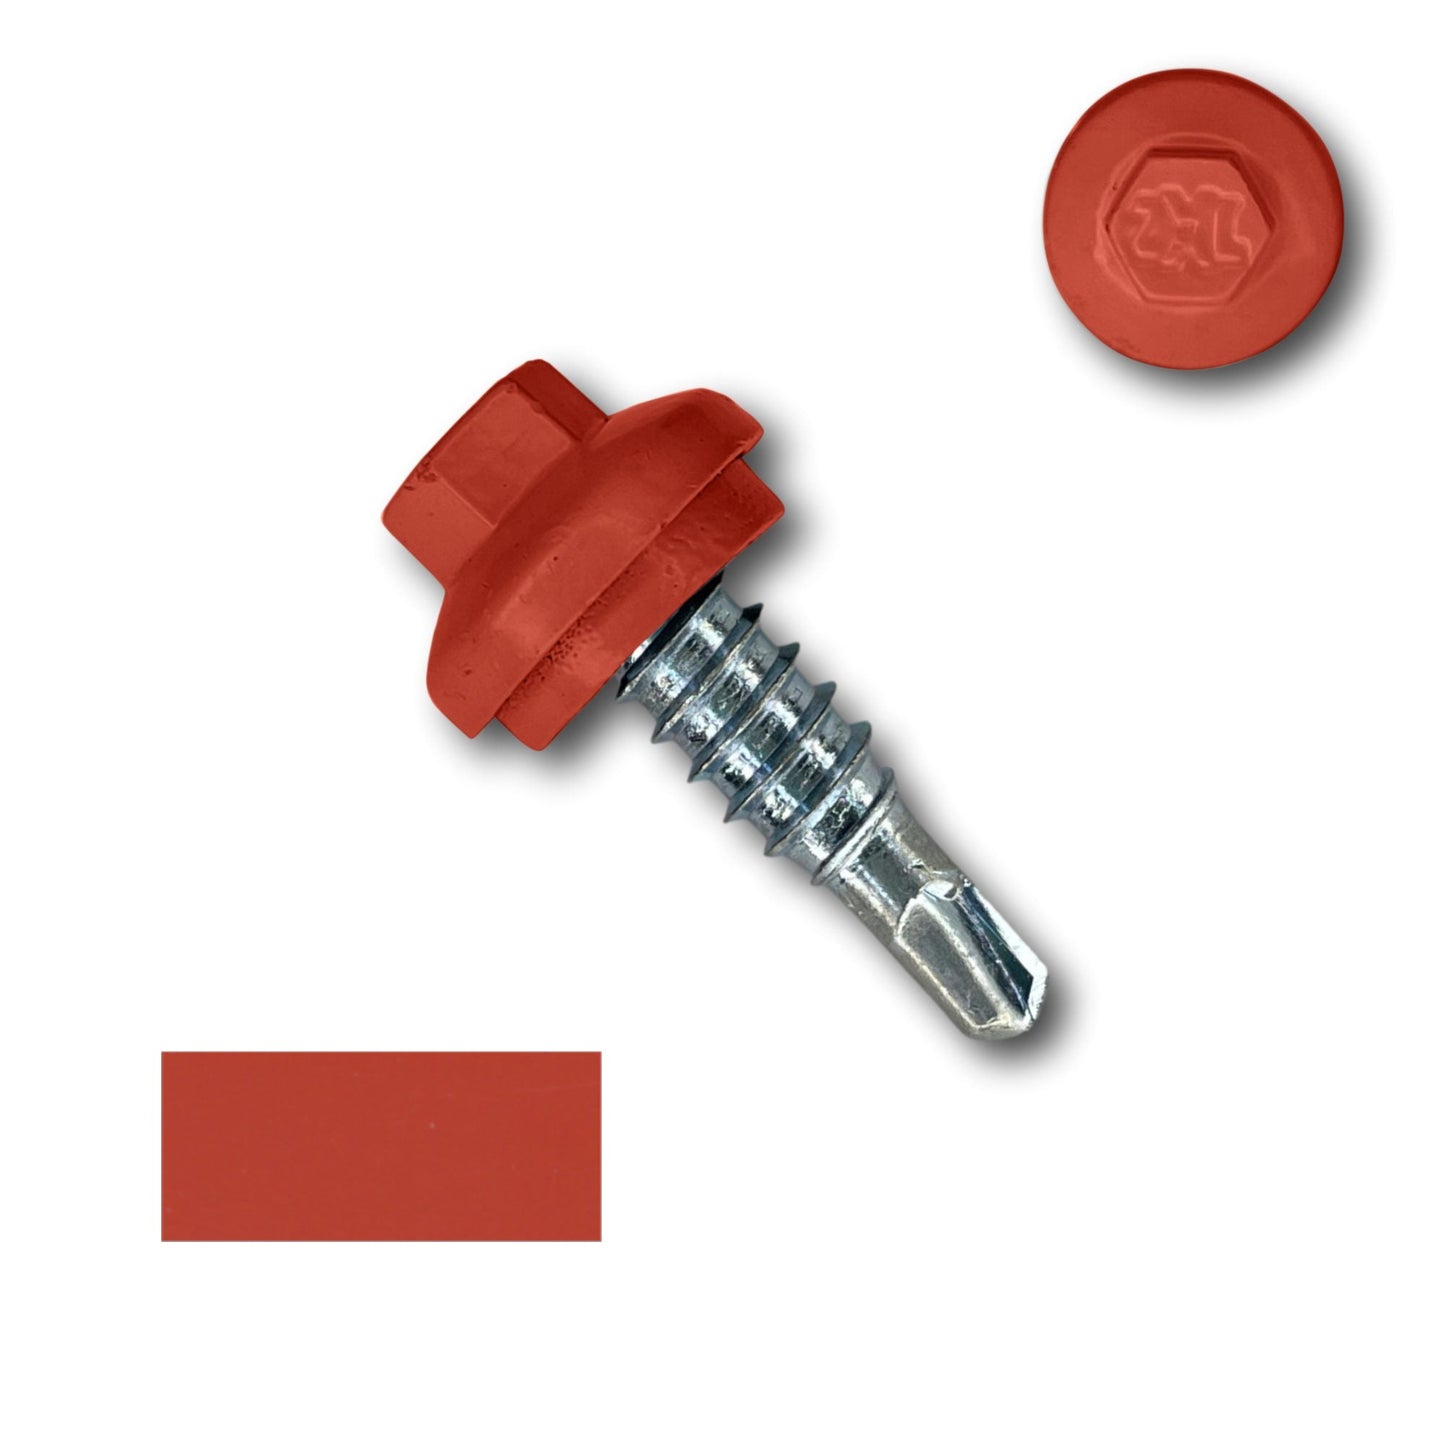 A #14 x 7/8" Stitch Lap ZXL Dome Cap Metal Building Screw from Perma Cover is shown, ideal for secure fastening. The screw features a sharp point for drilling. A separate loose washer lid and a rectangular red color sample matching the screw's coating are also displayed, highlighting the quality of these self-drilling metal screws.